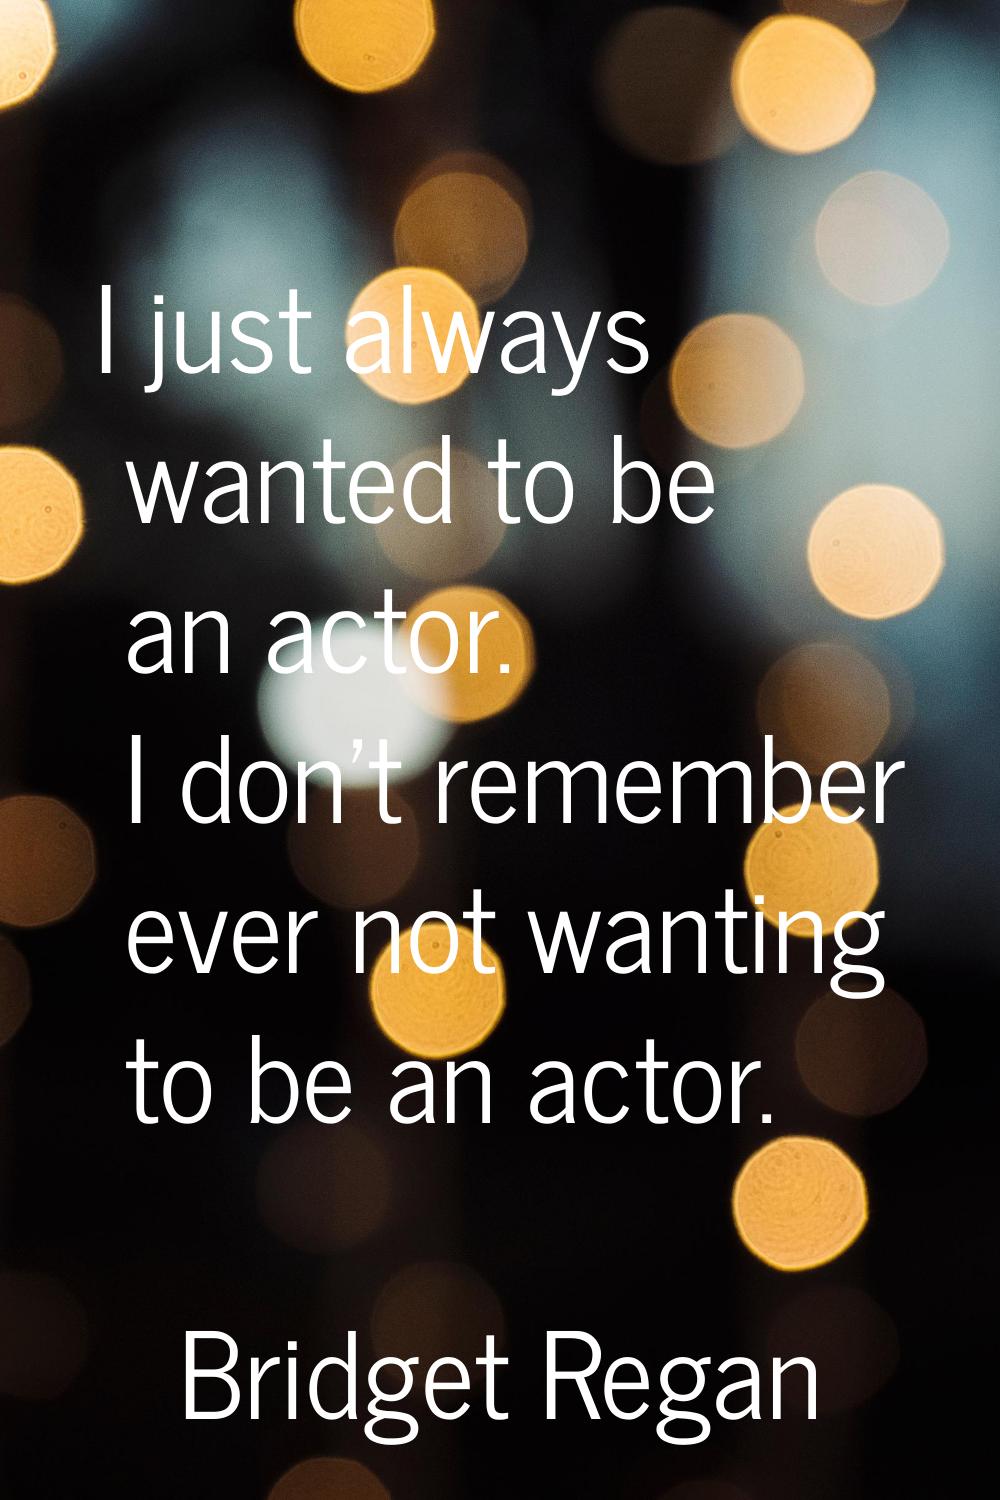 I just always wanted to be an actor. I don't remember ever not wanting to be an actor.